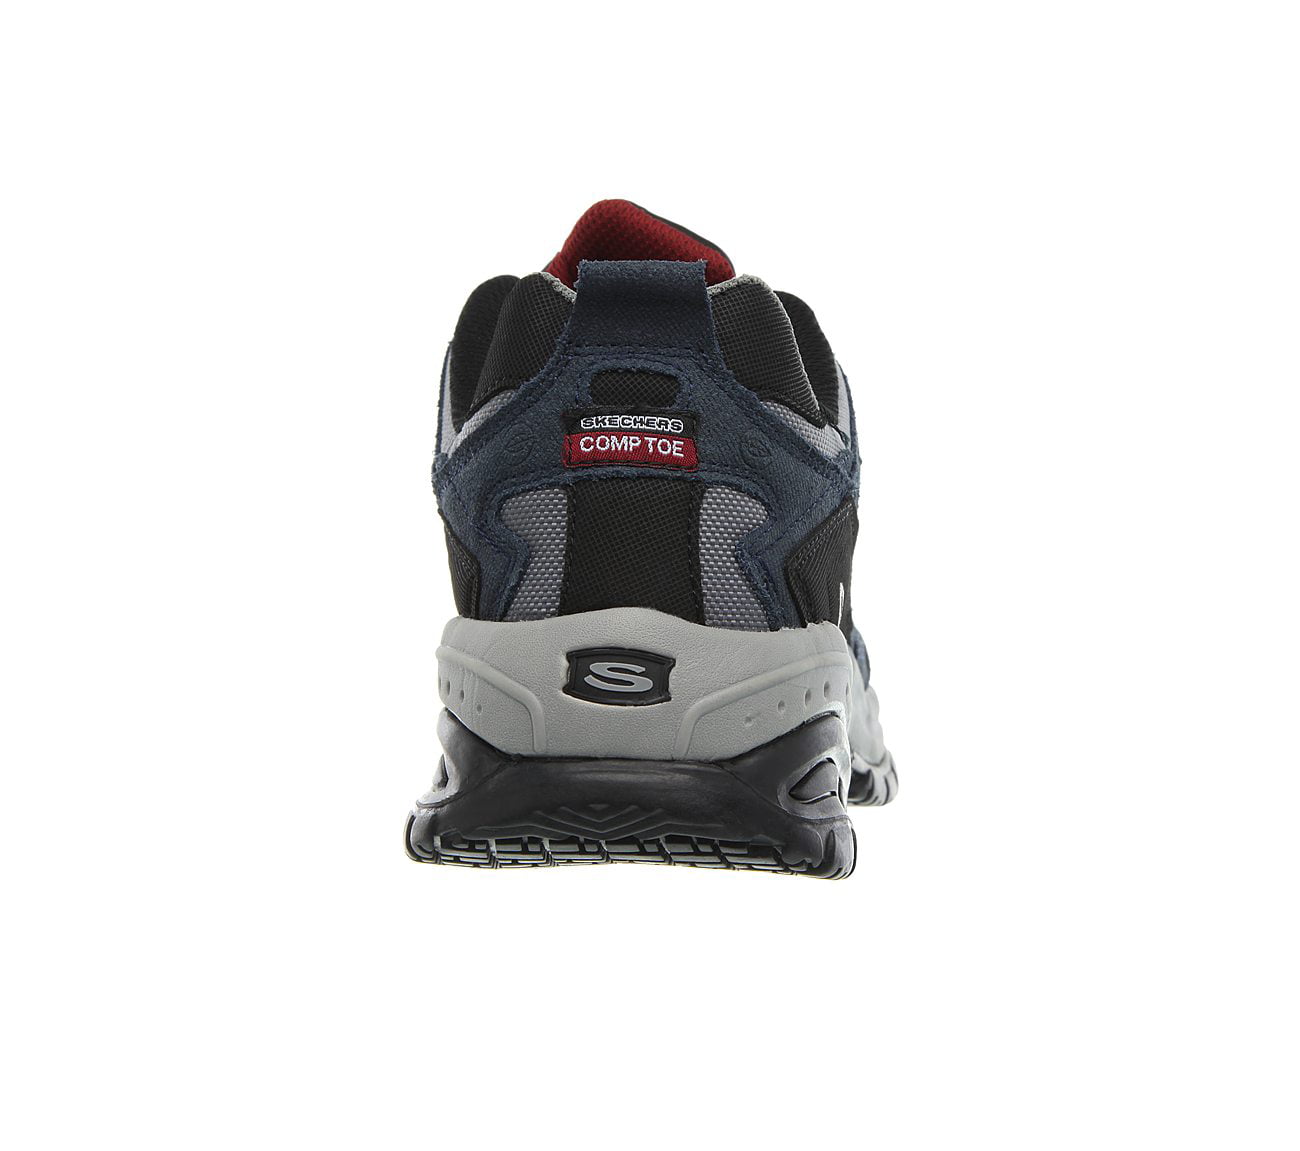 skechers grinnell